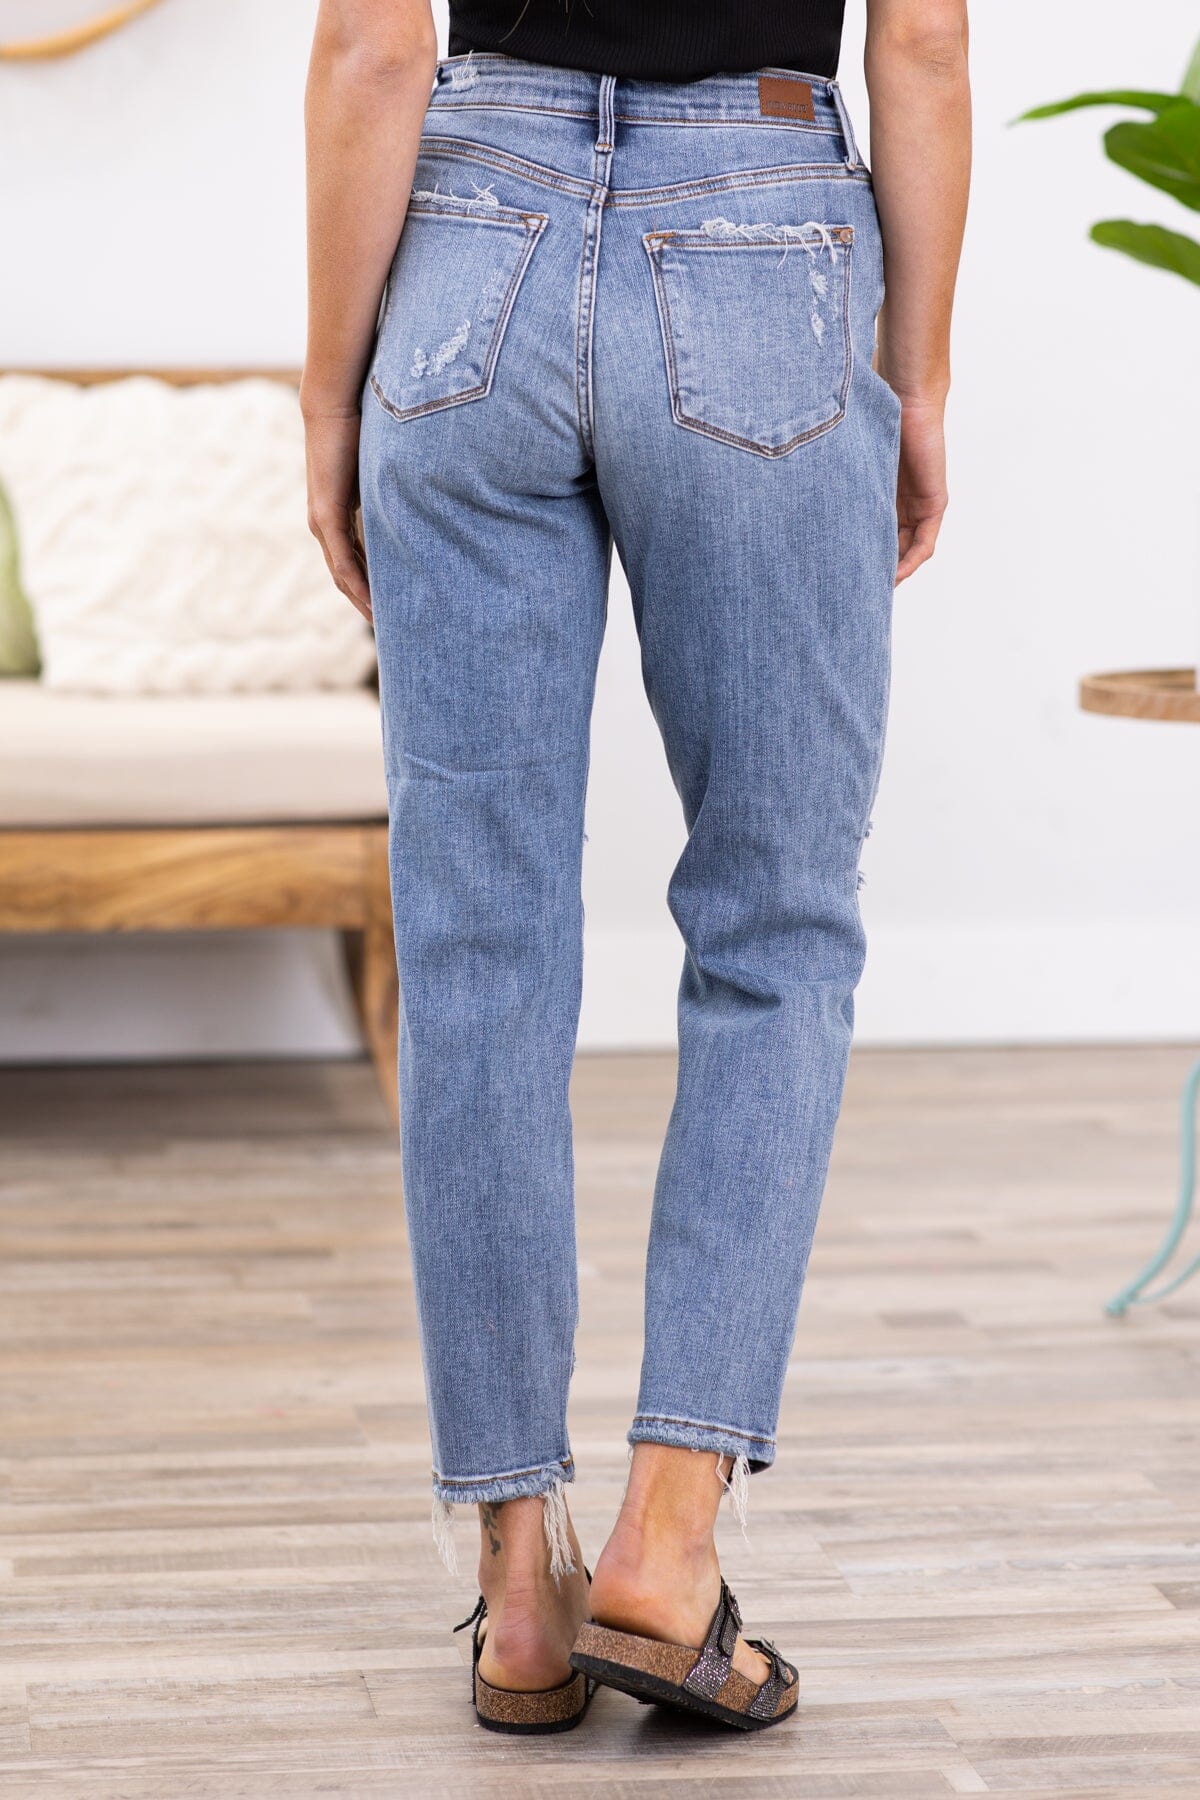 Judy Blue Button Fly Boyfriend Fit Jeans - Filly Flair